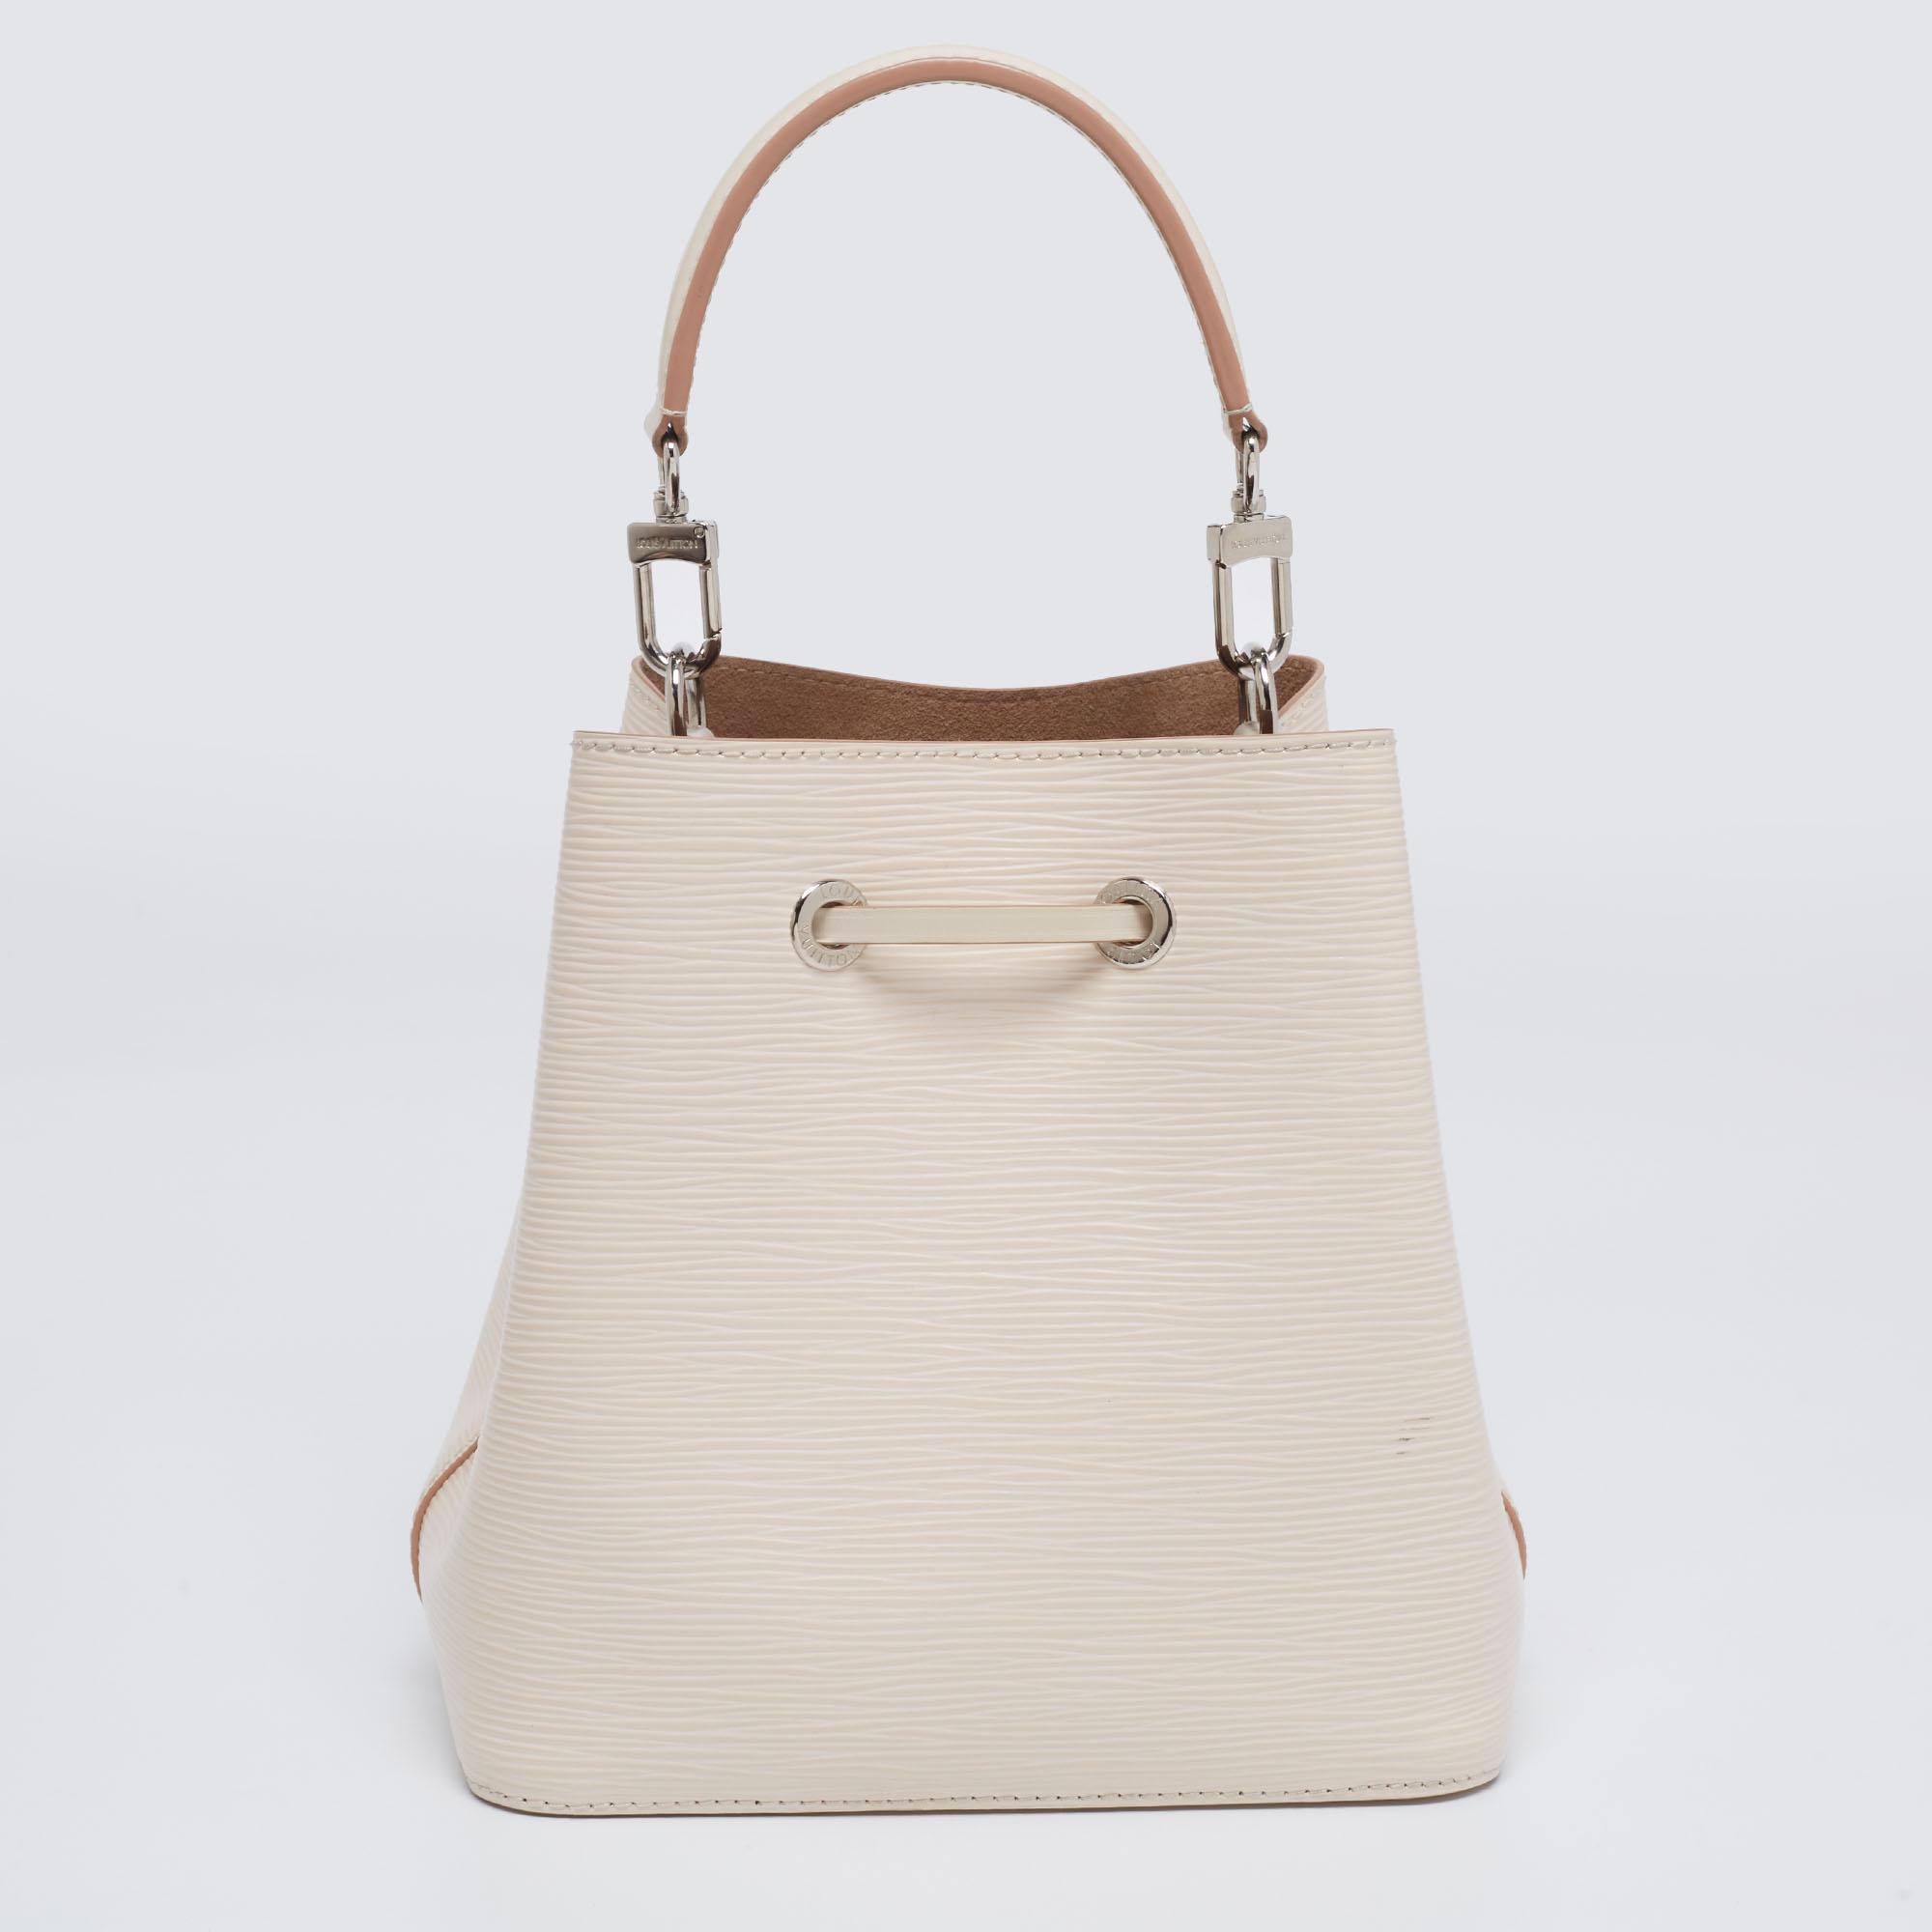 Presented by the House of Louis Vuitton, this NéoNoé MM bag will deliver a sense of signature charm and class with its neatly-made silhouette. It is fashioned in Epi leather, with distinct silver-toned hardware completing its fittings. It has a 12